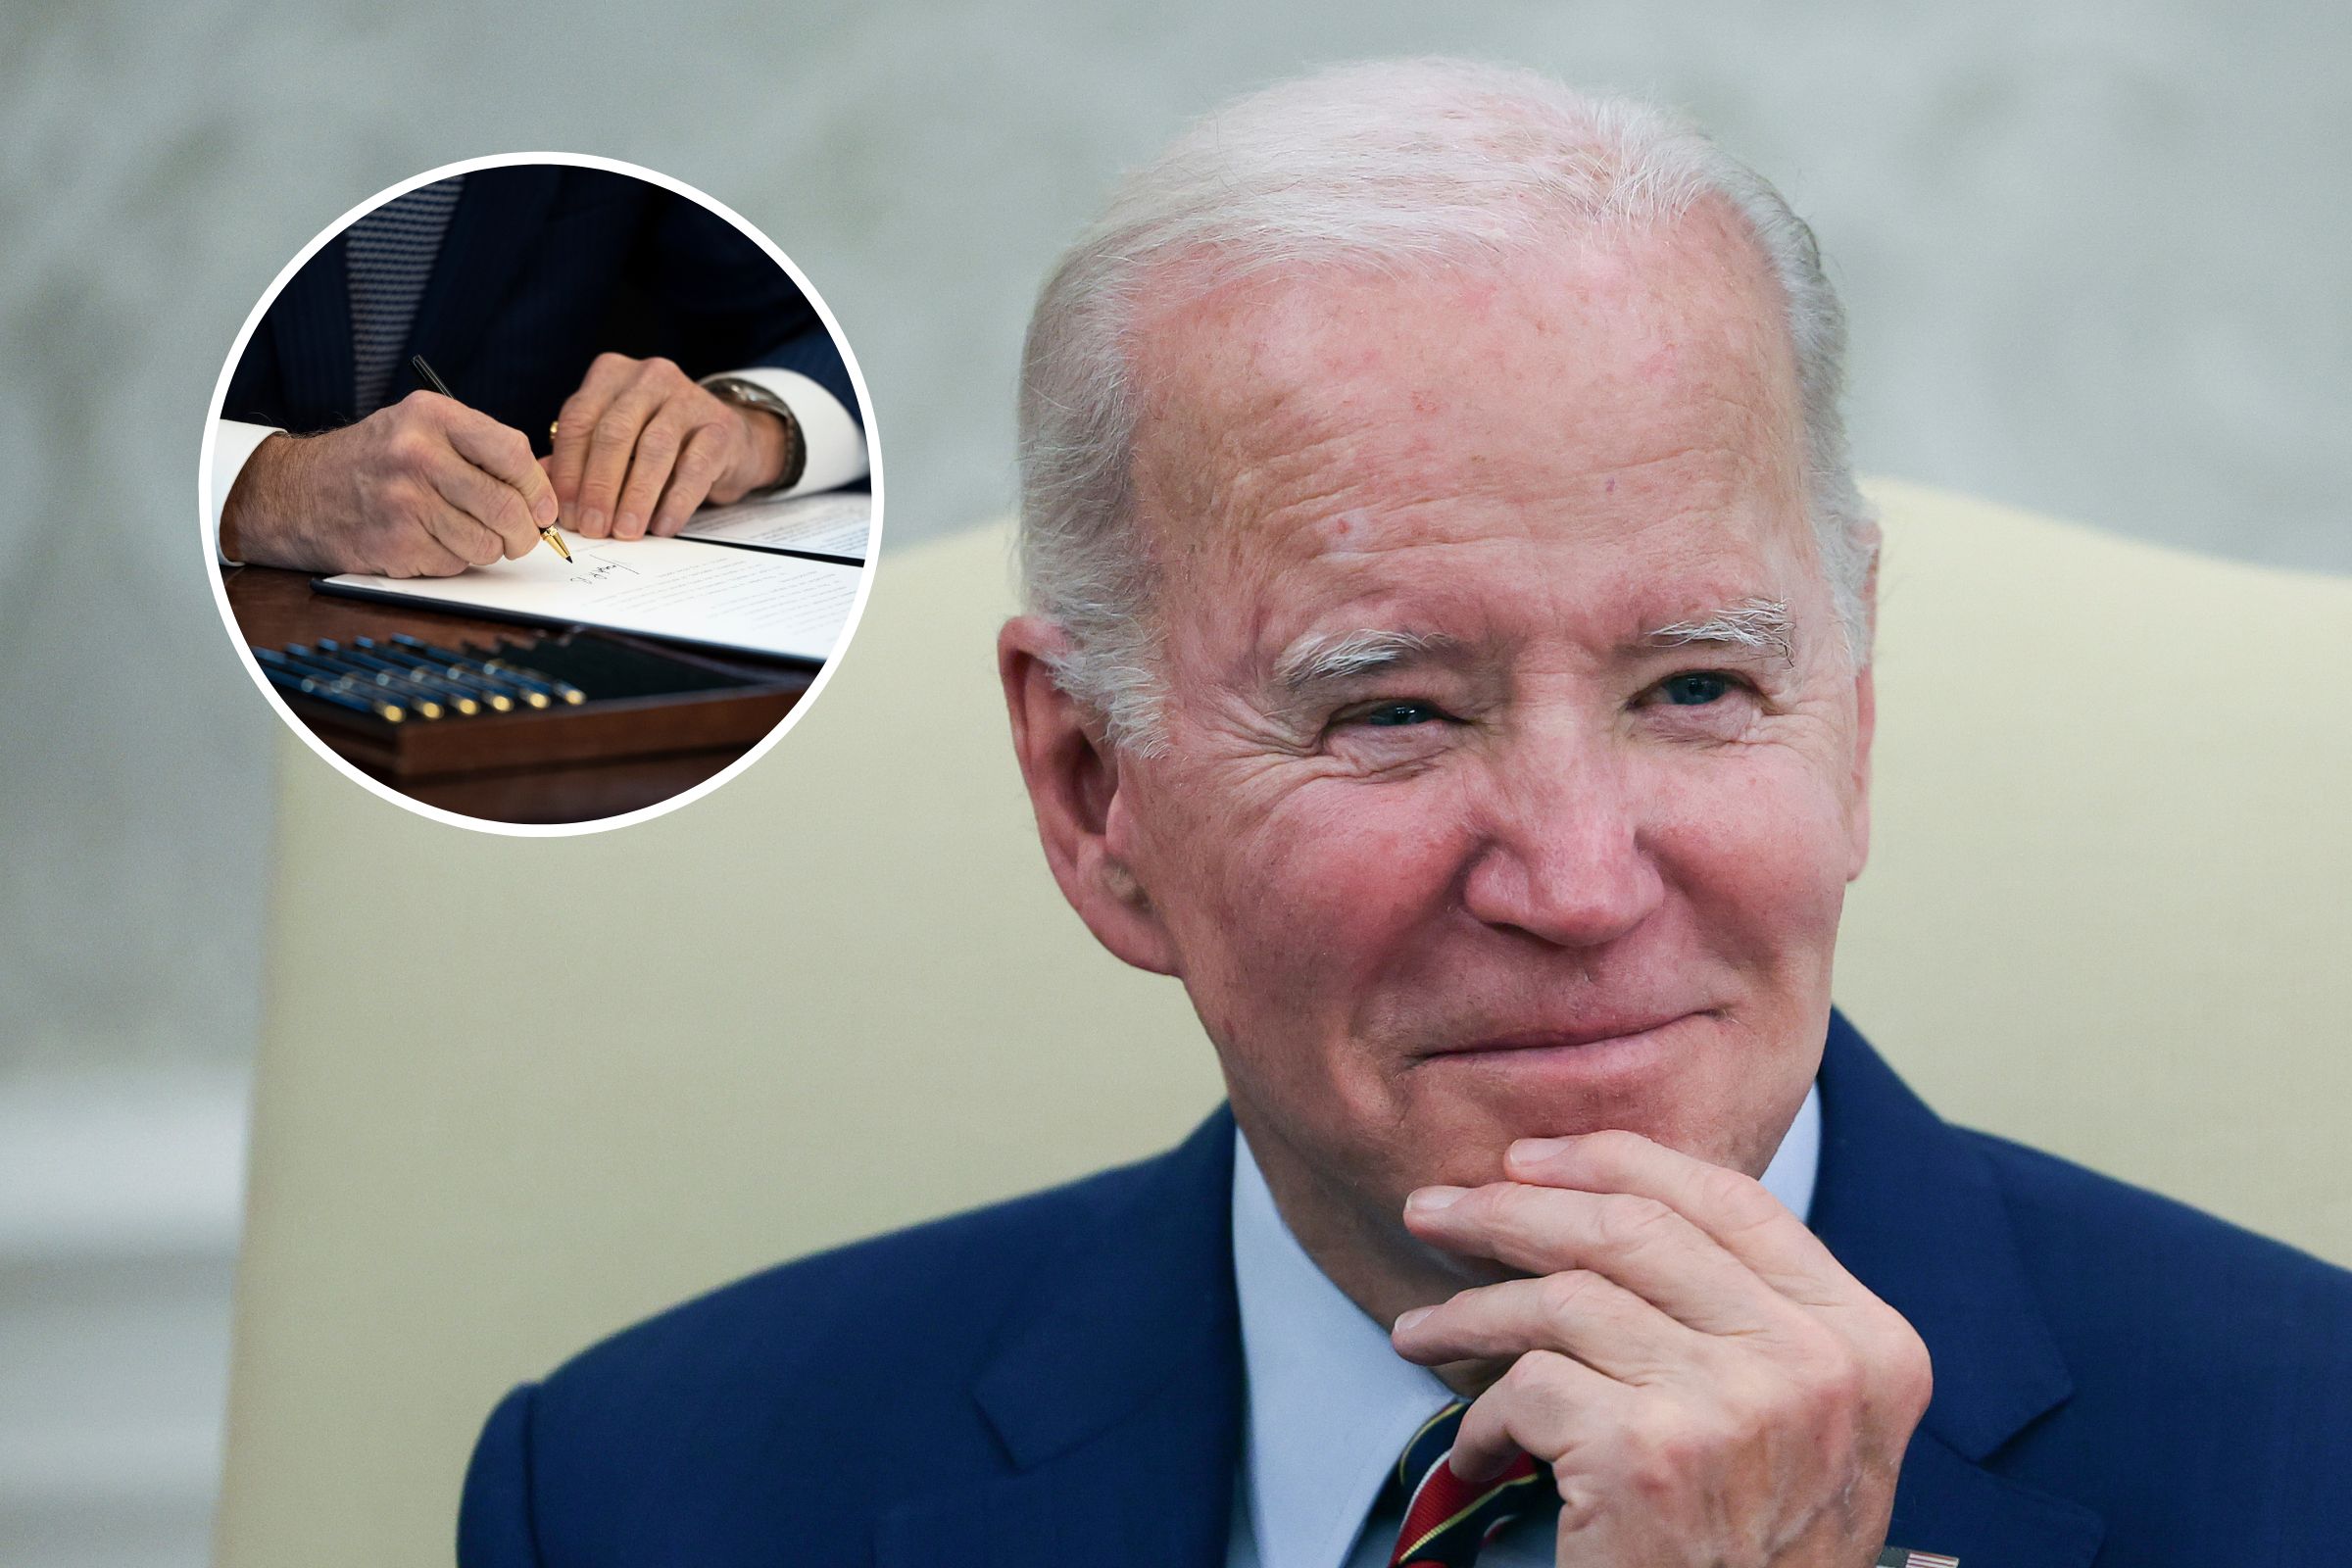 Video shows Biden smiling amid questions over classified documents